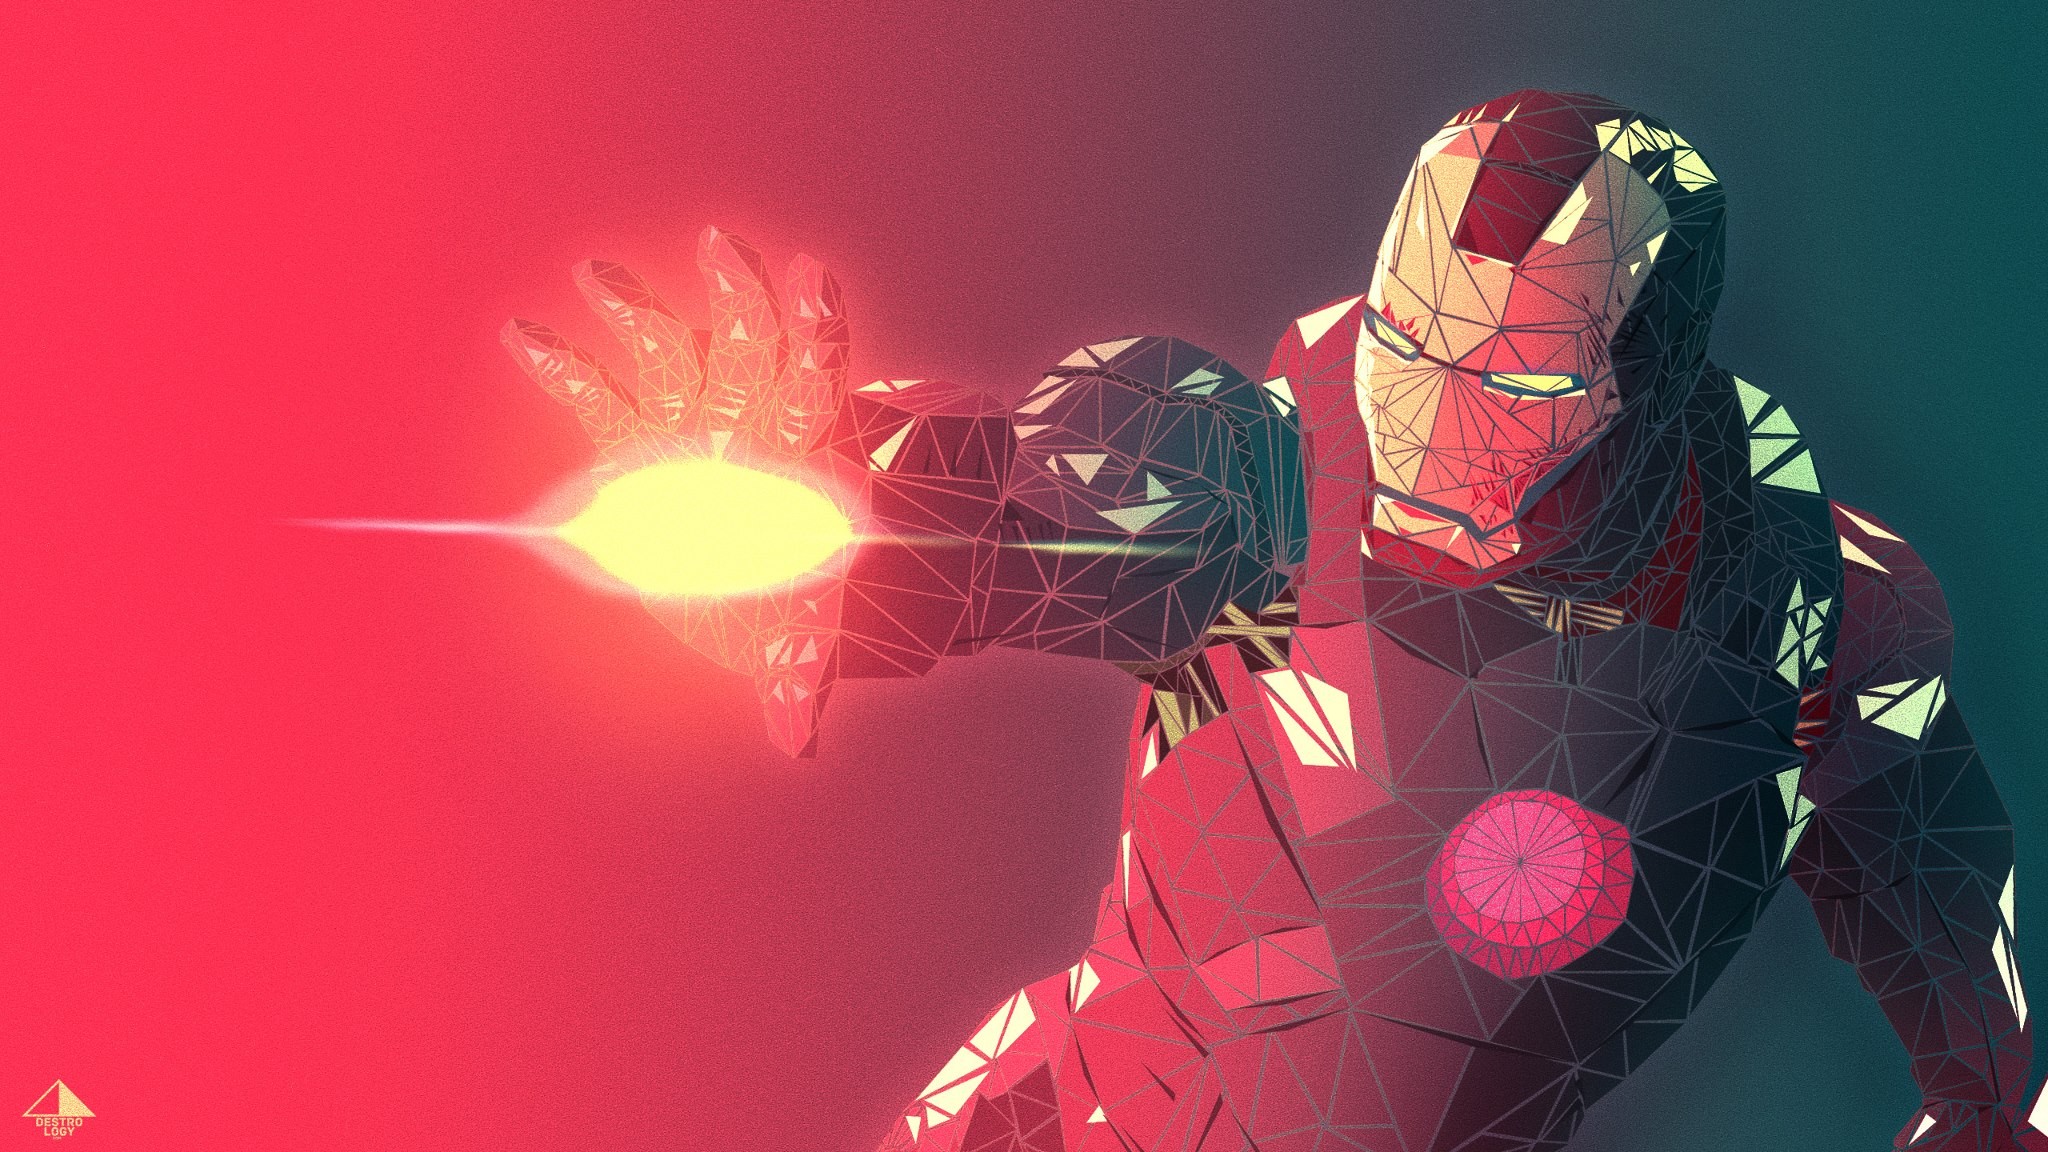 Best Iron Man Jarvis Wallpaper Hd Full Hd × For Pc - Iron Man Abstract Hd , HD Wallpaper & Backgrounds